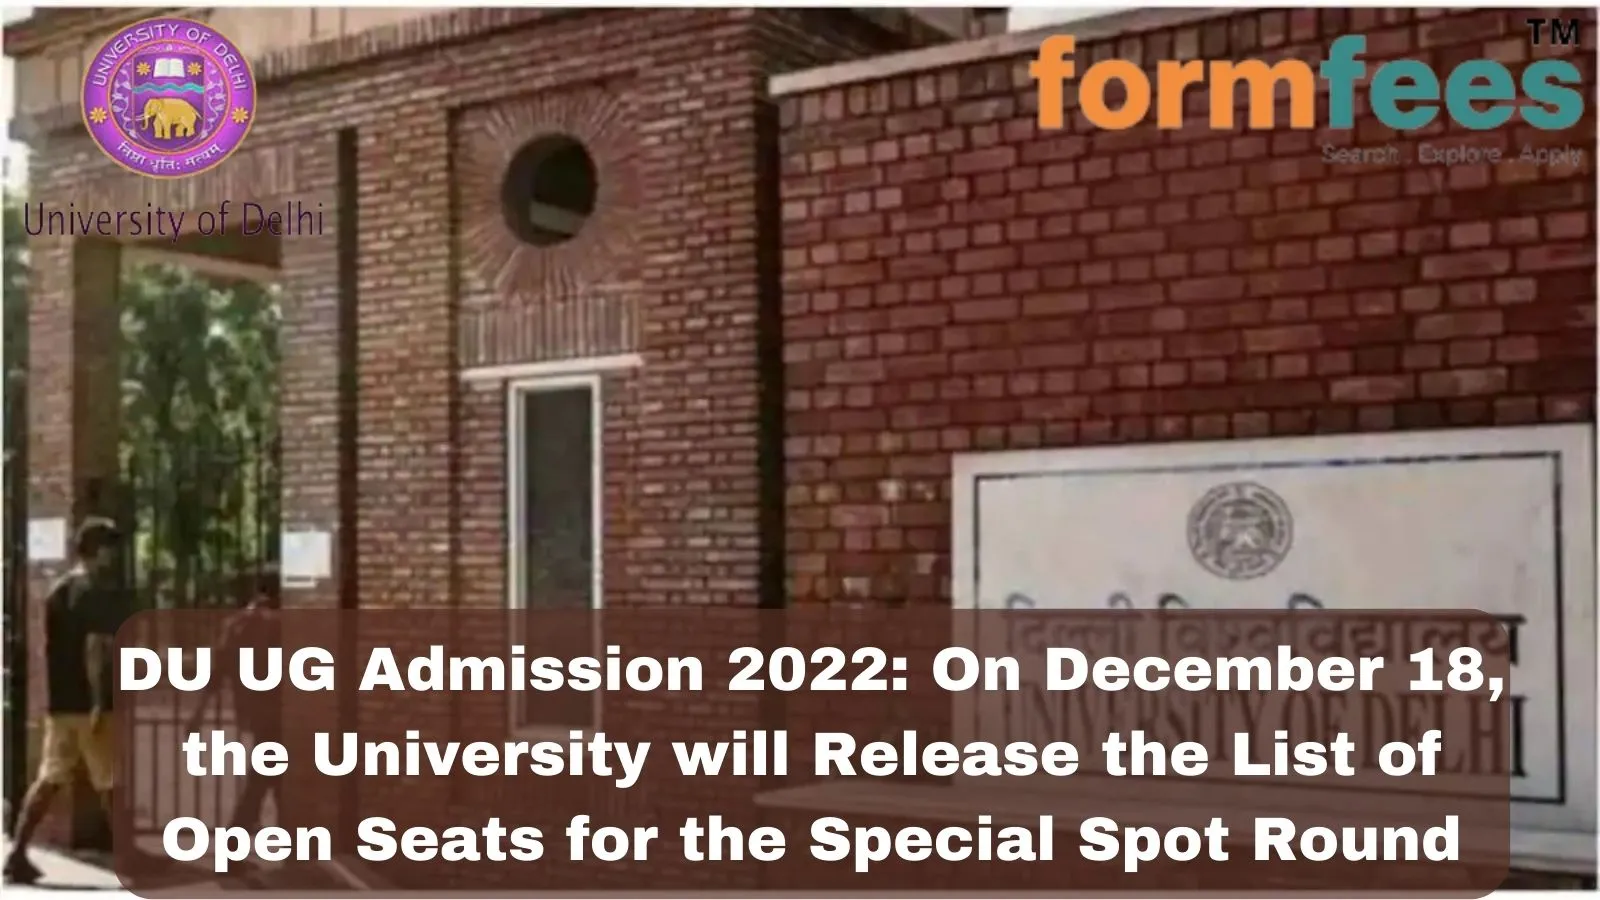 DU UG Admission 2022: On December 18, the University will Release the List of Open Seats for the Special Spot Round